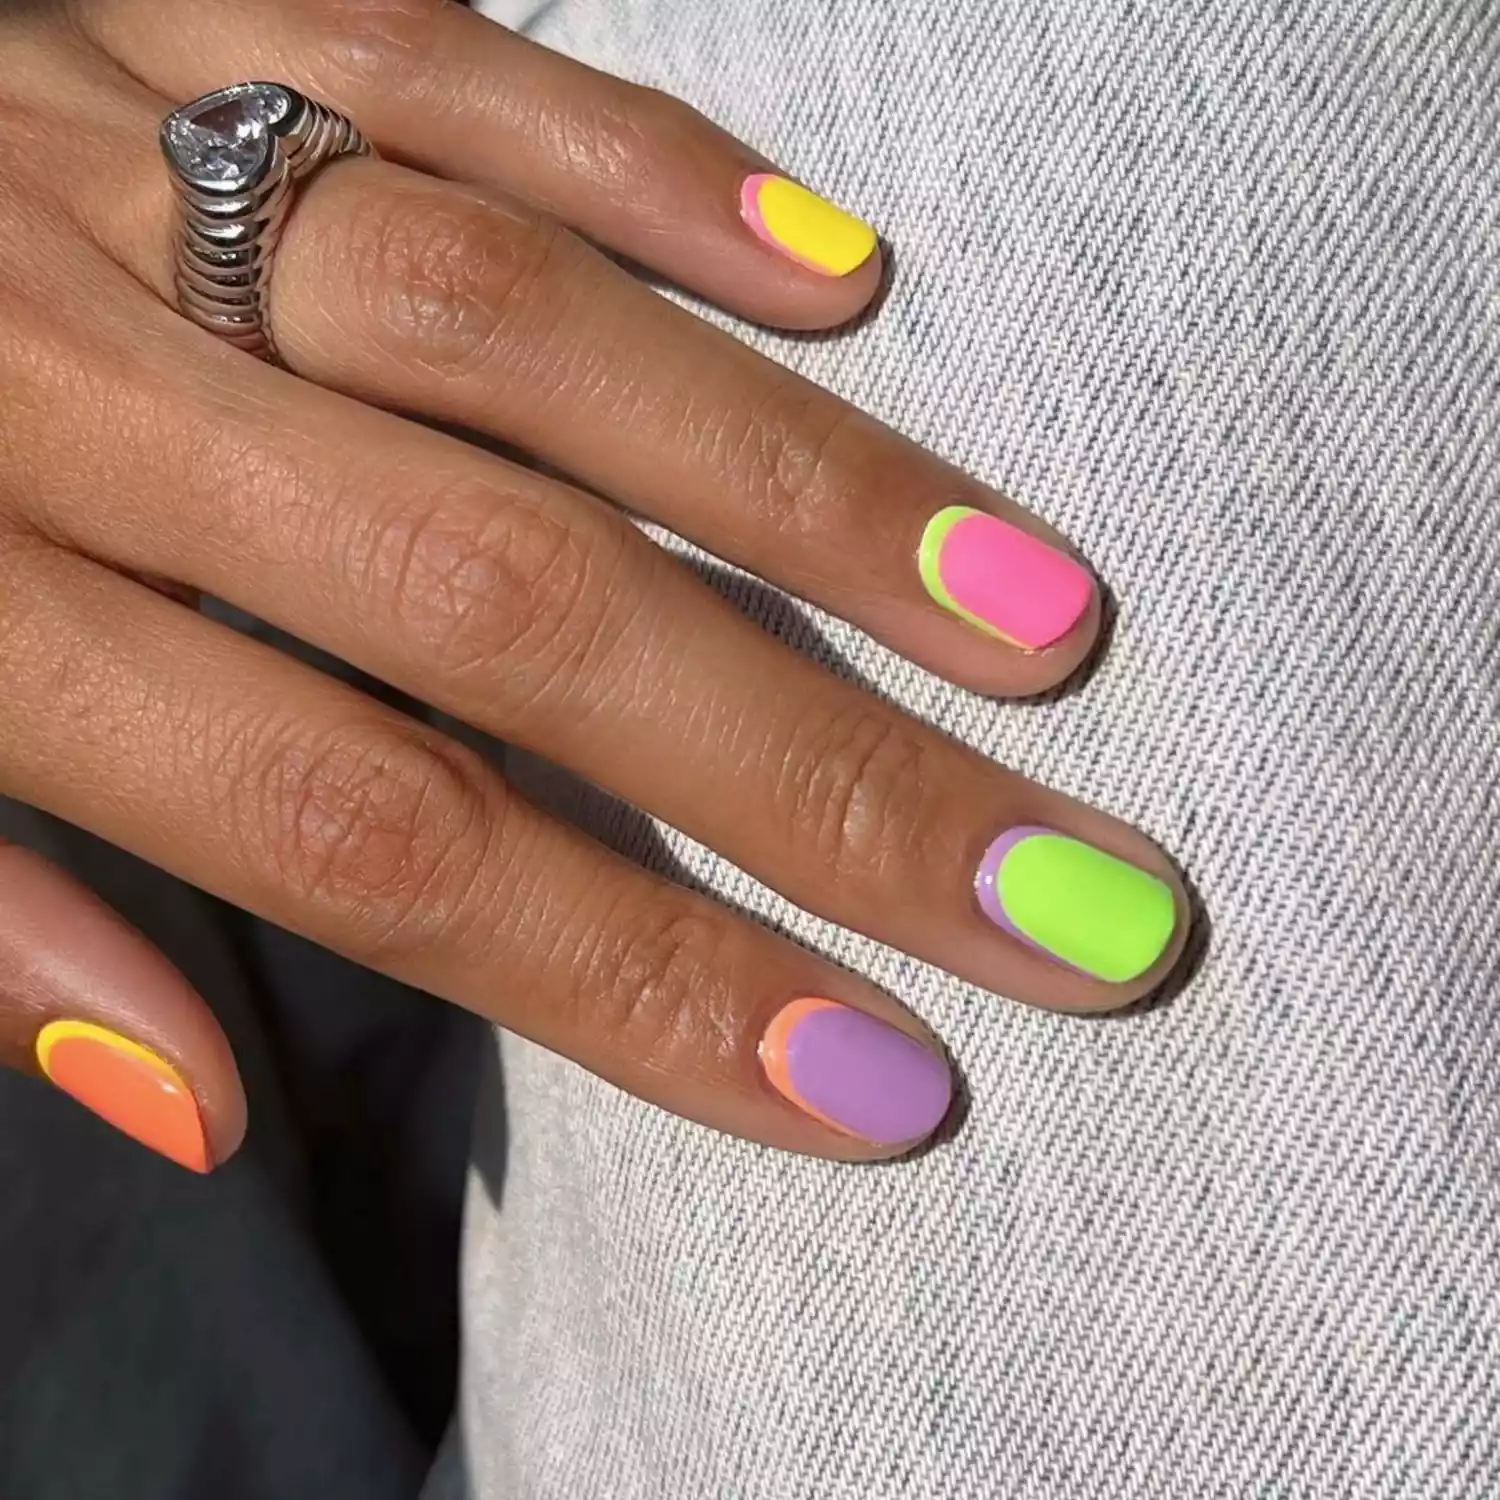 30 Colorful Nail Ideas to Brighten Up Your Next Manicure Appointment